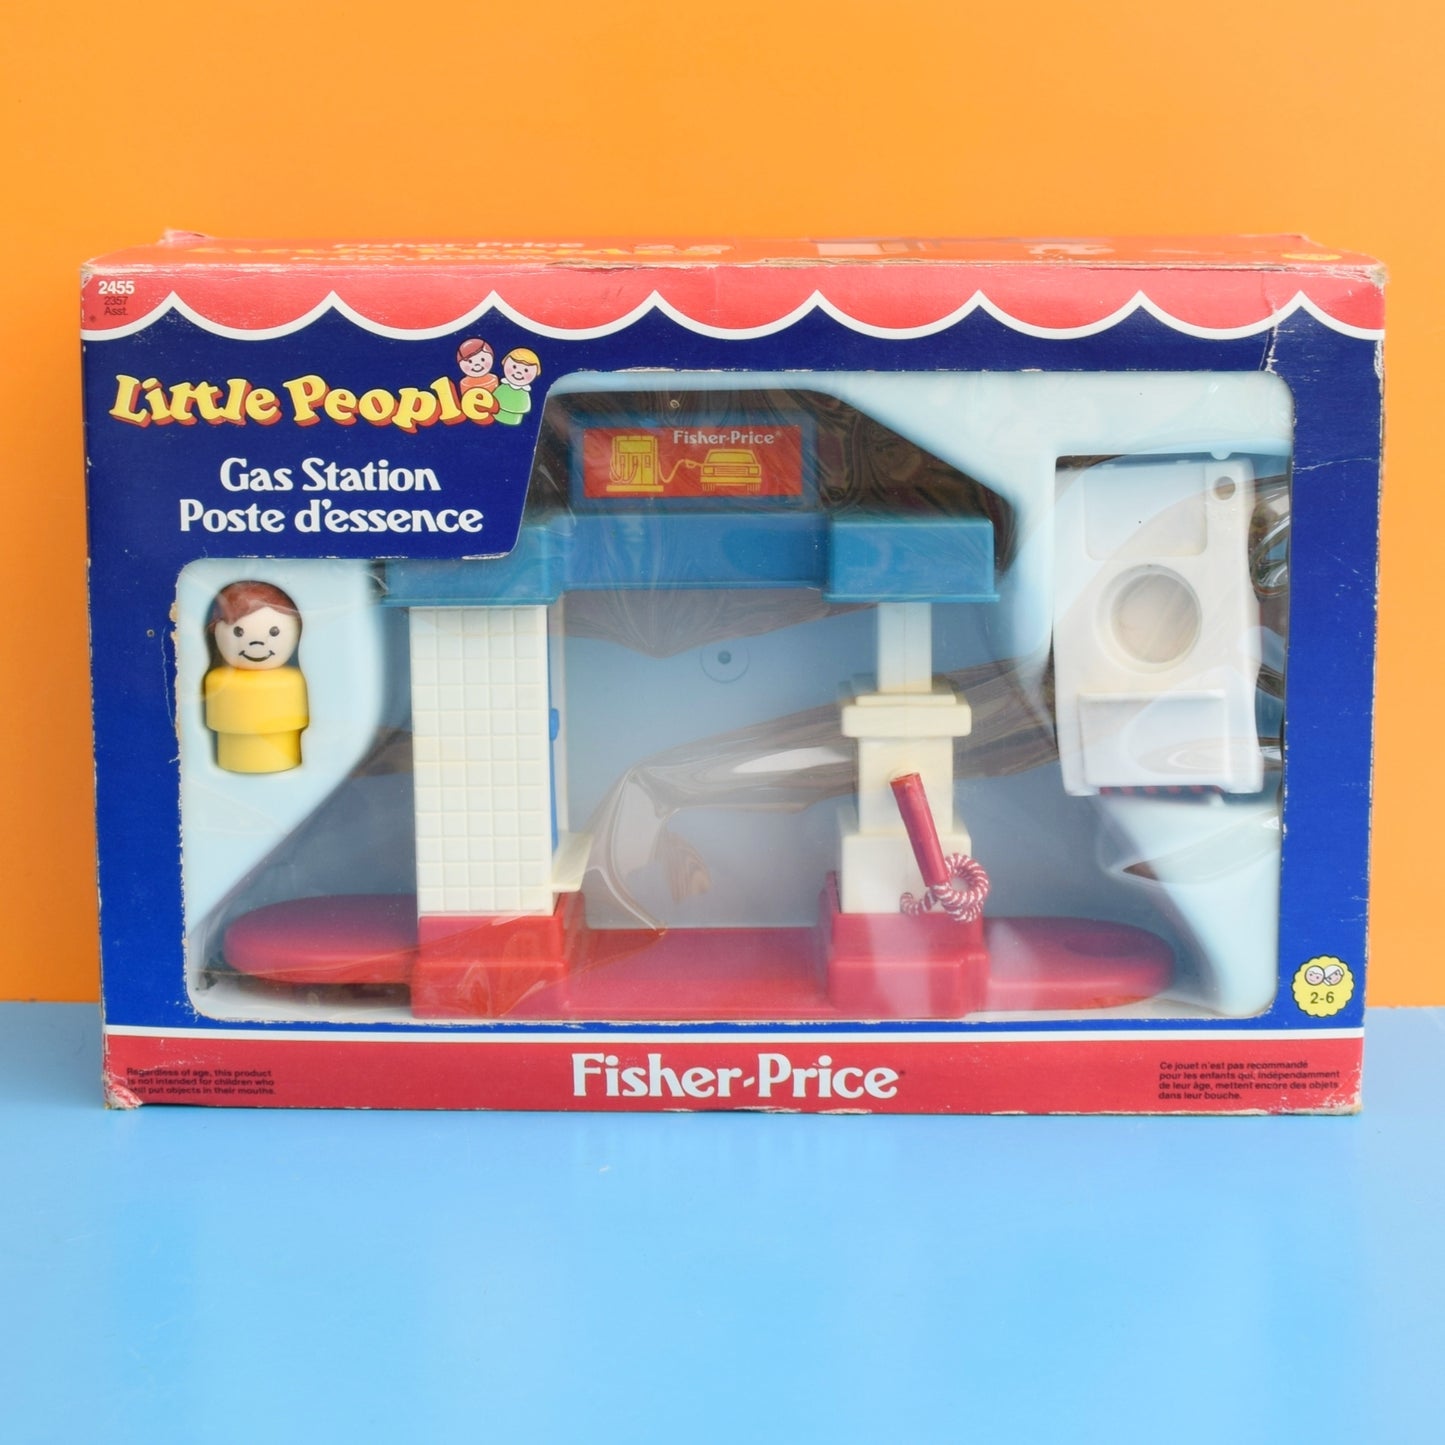 Vintage 1980s Fisher Price - Gas Station - Boxed